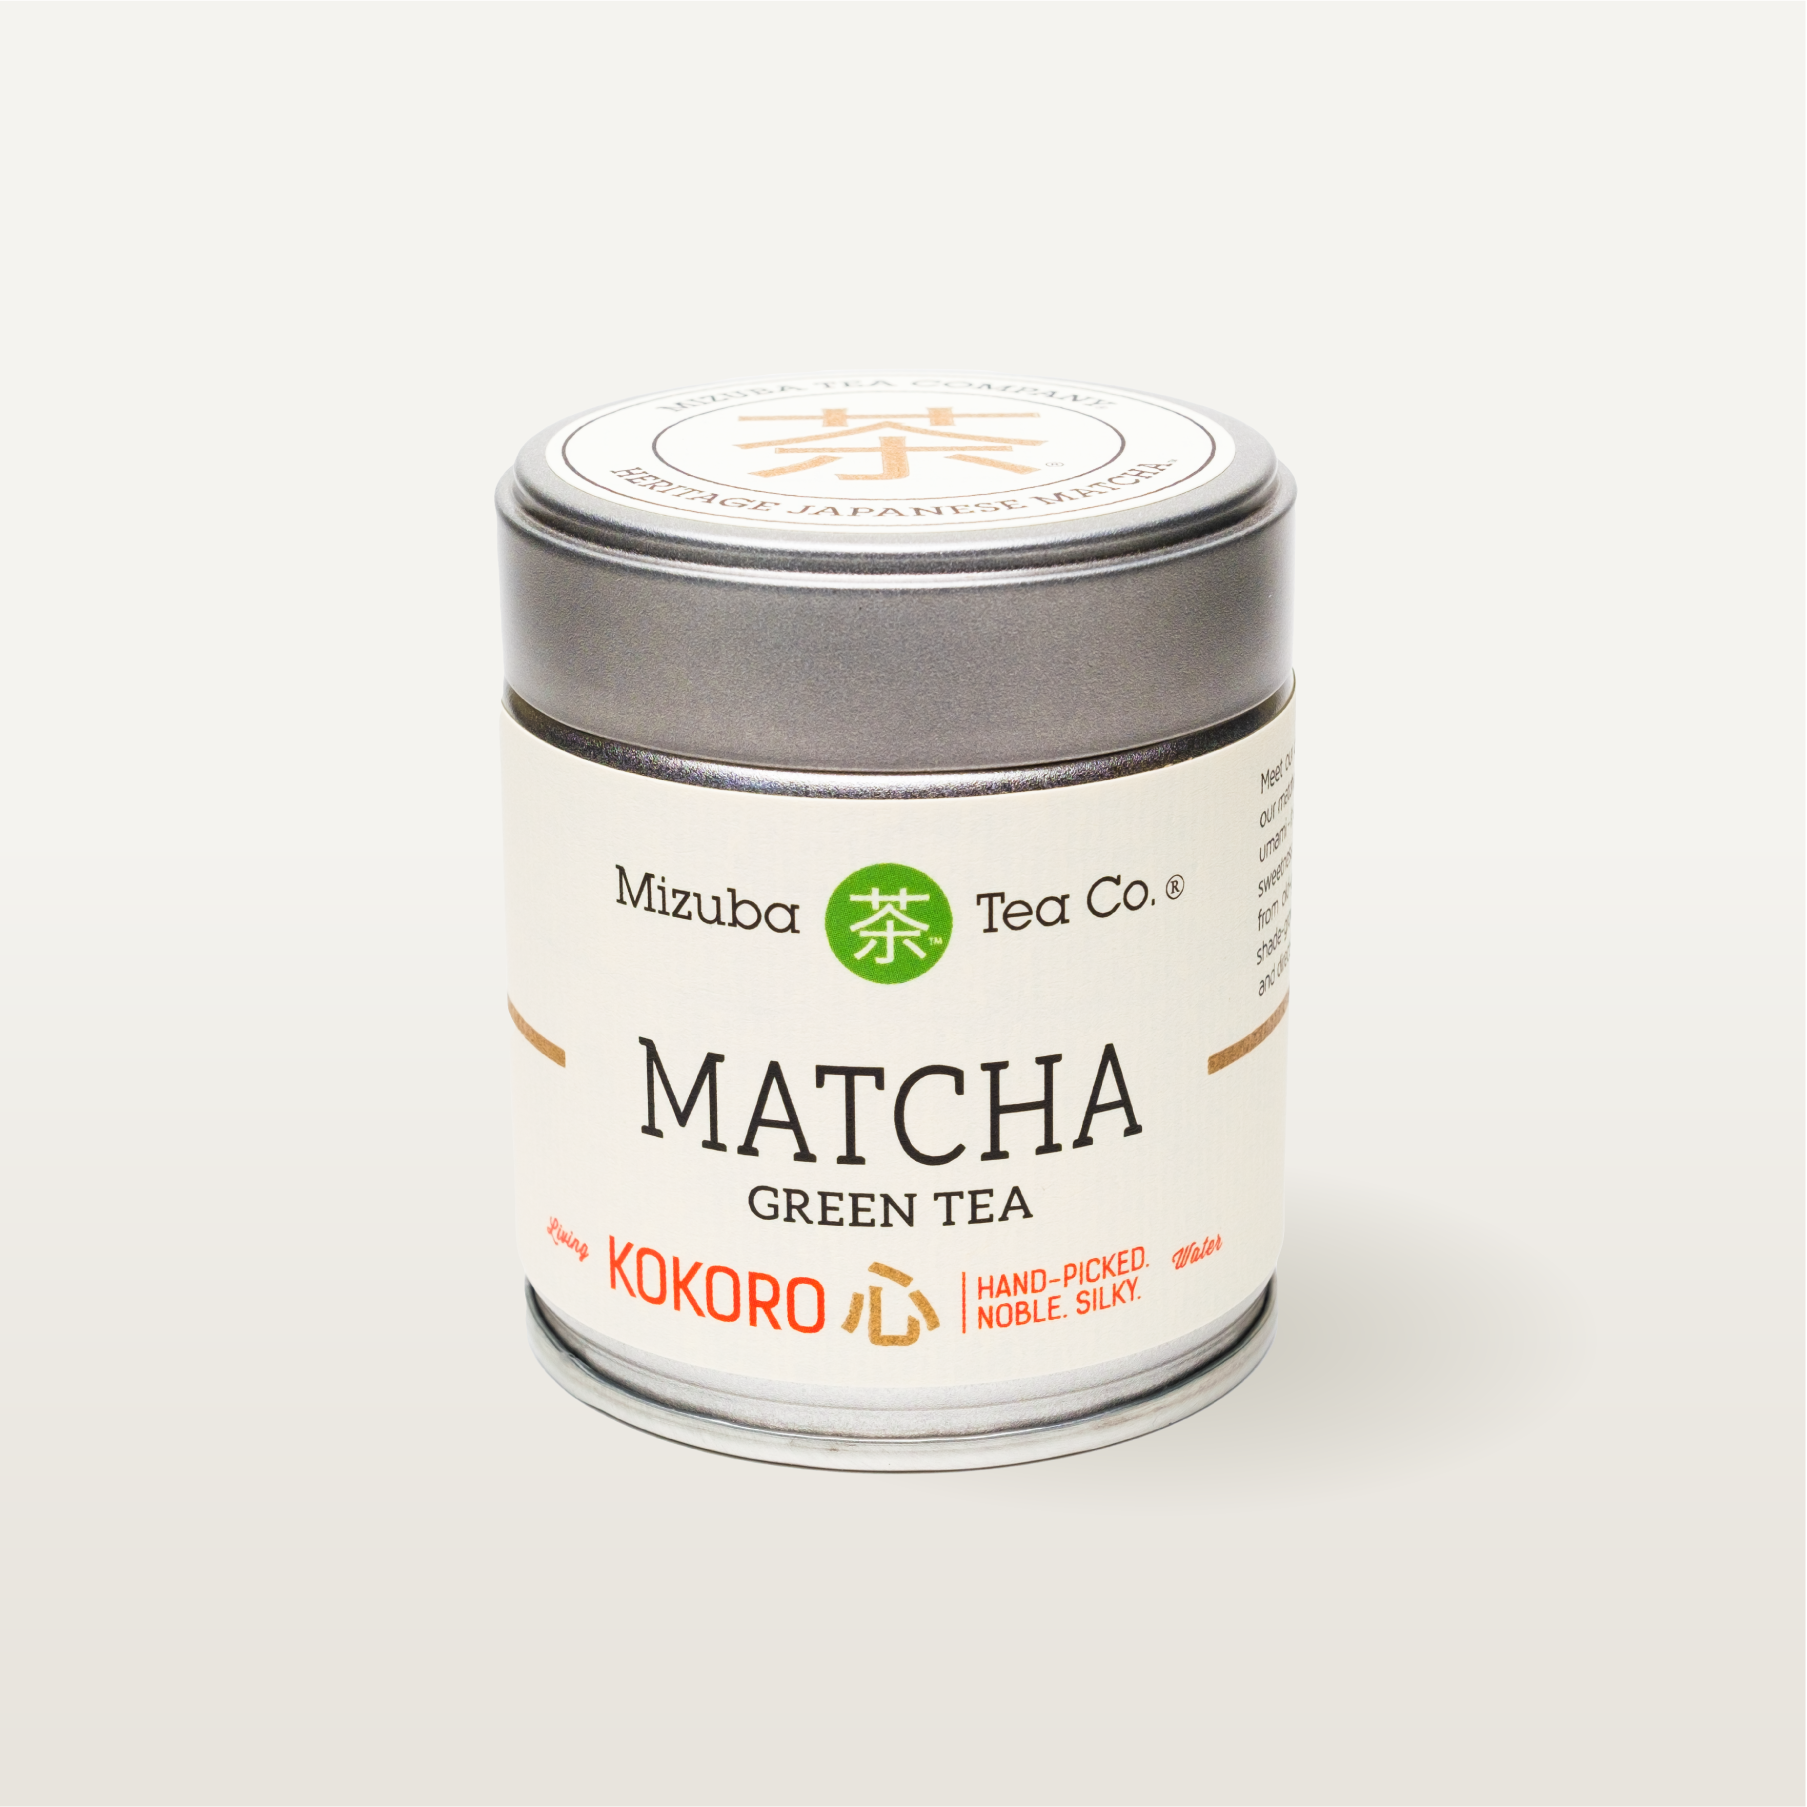 Japanese Matcha Green Tea: A Cup of History and Mystery - Matcha Maiden